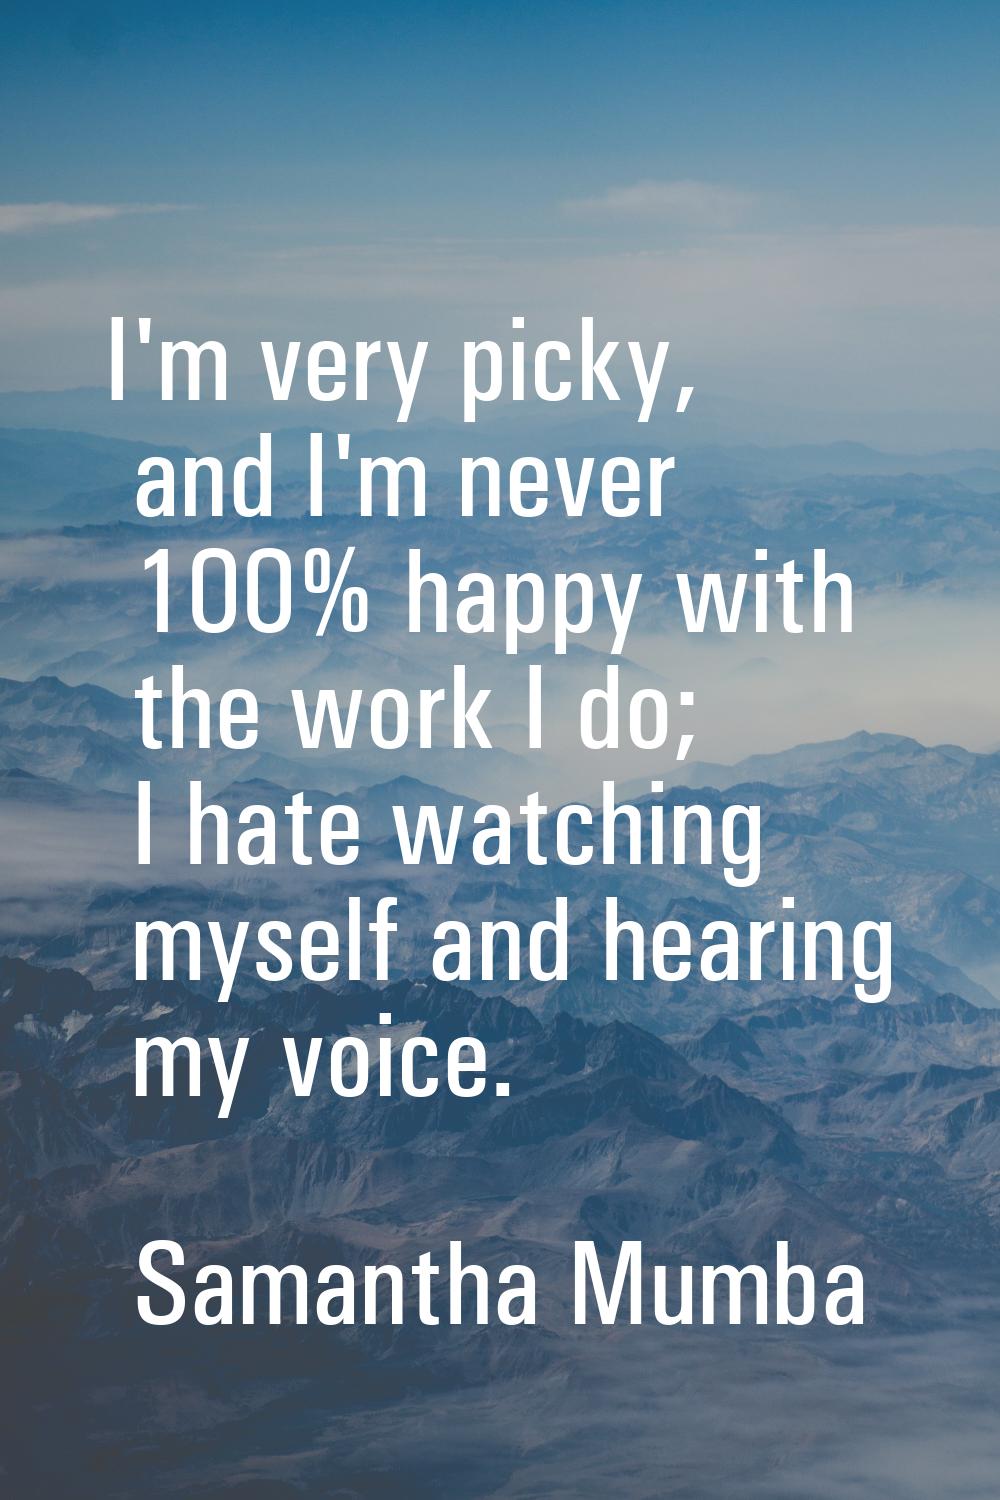 I'm very picky, and I'm never 100% happy with the work I do; I hate watching myself and hearing my 